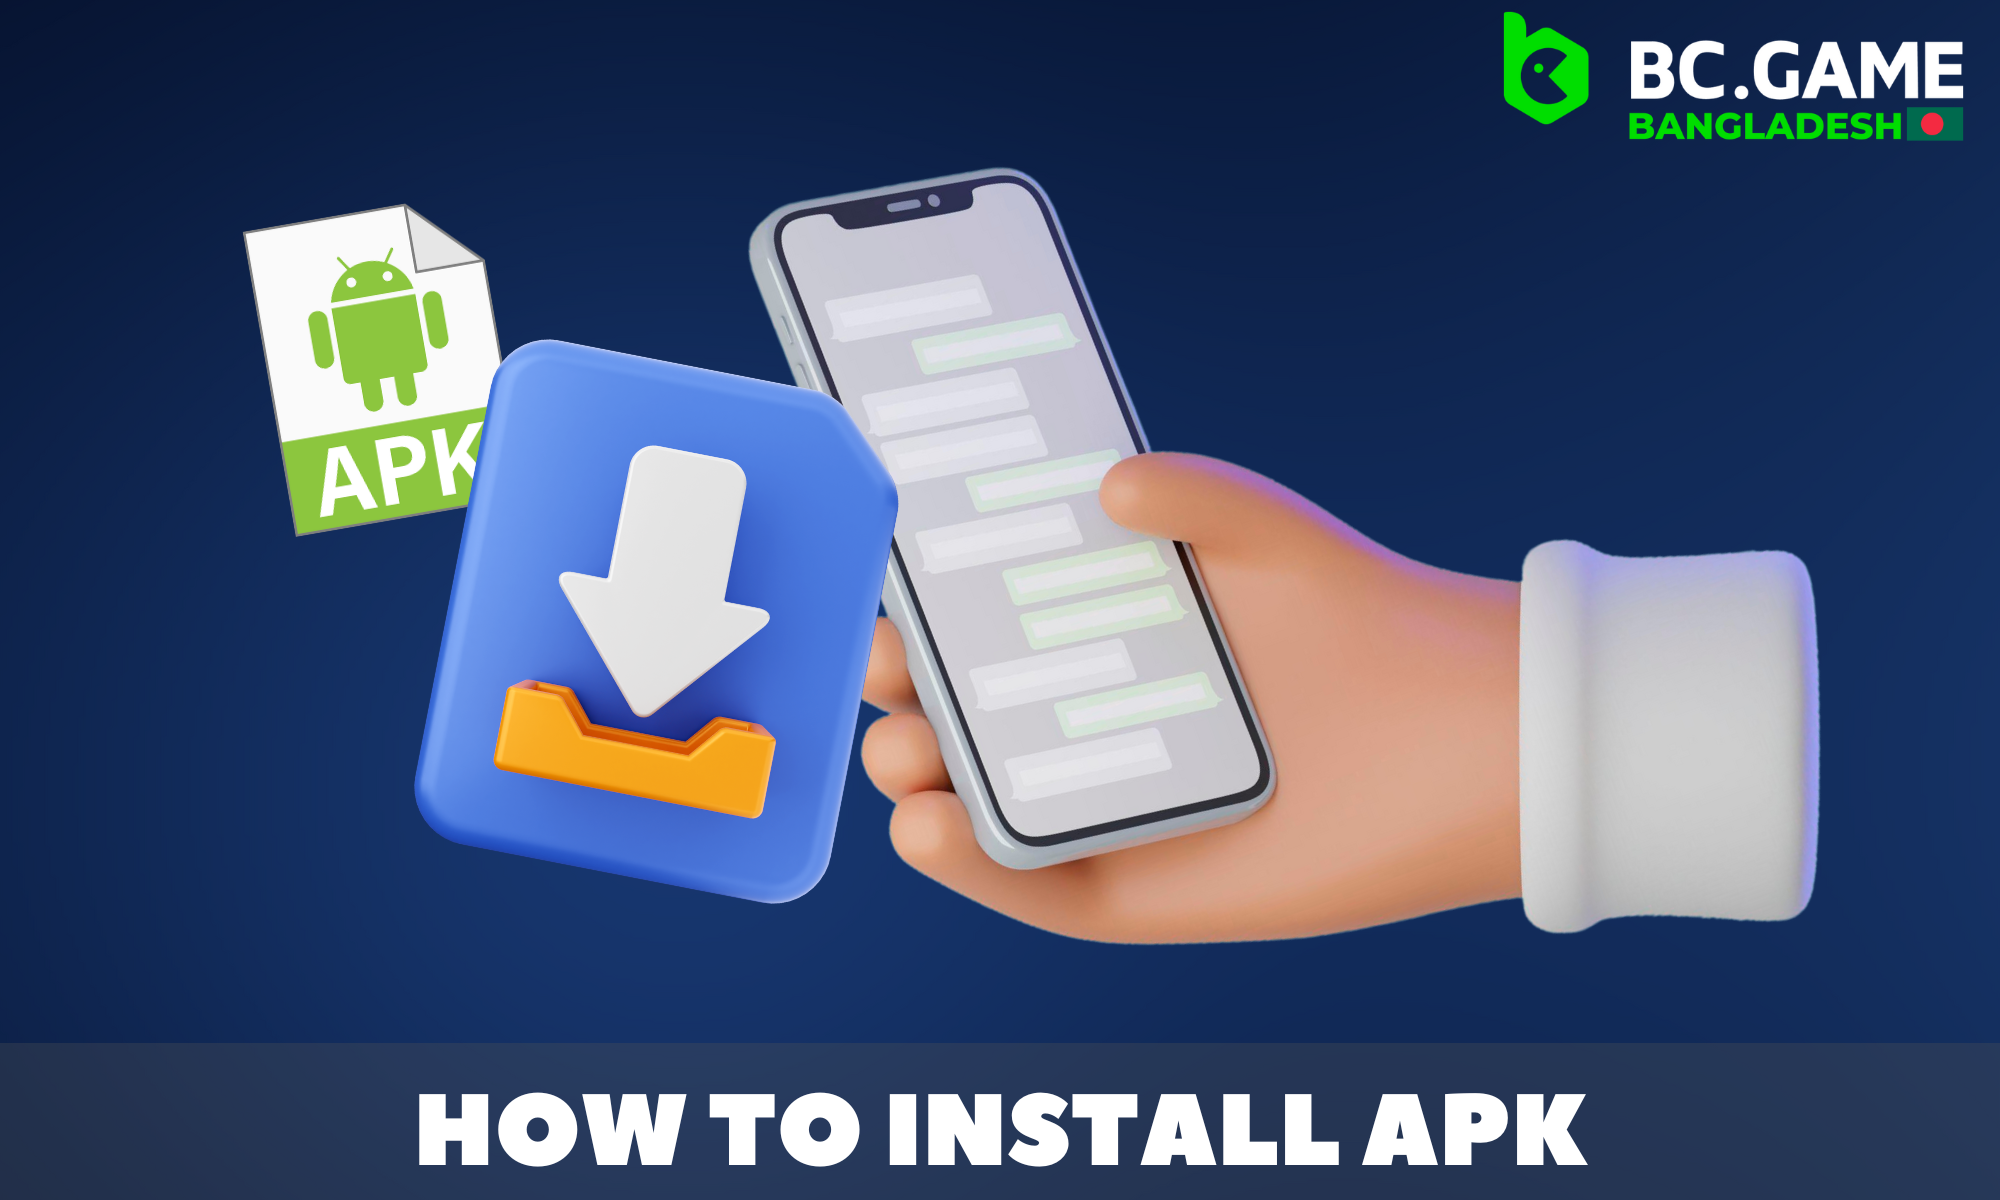 Step by step how to install APK file of BC Game